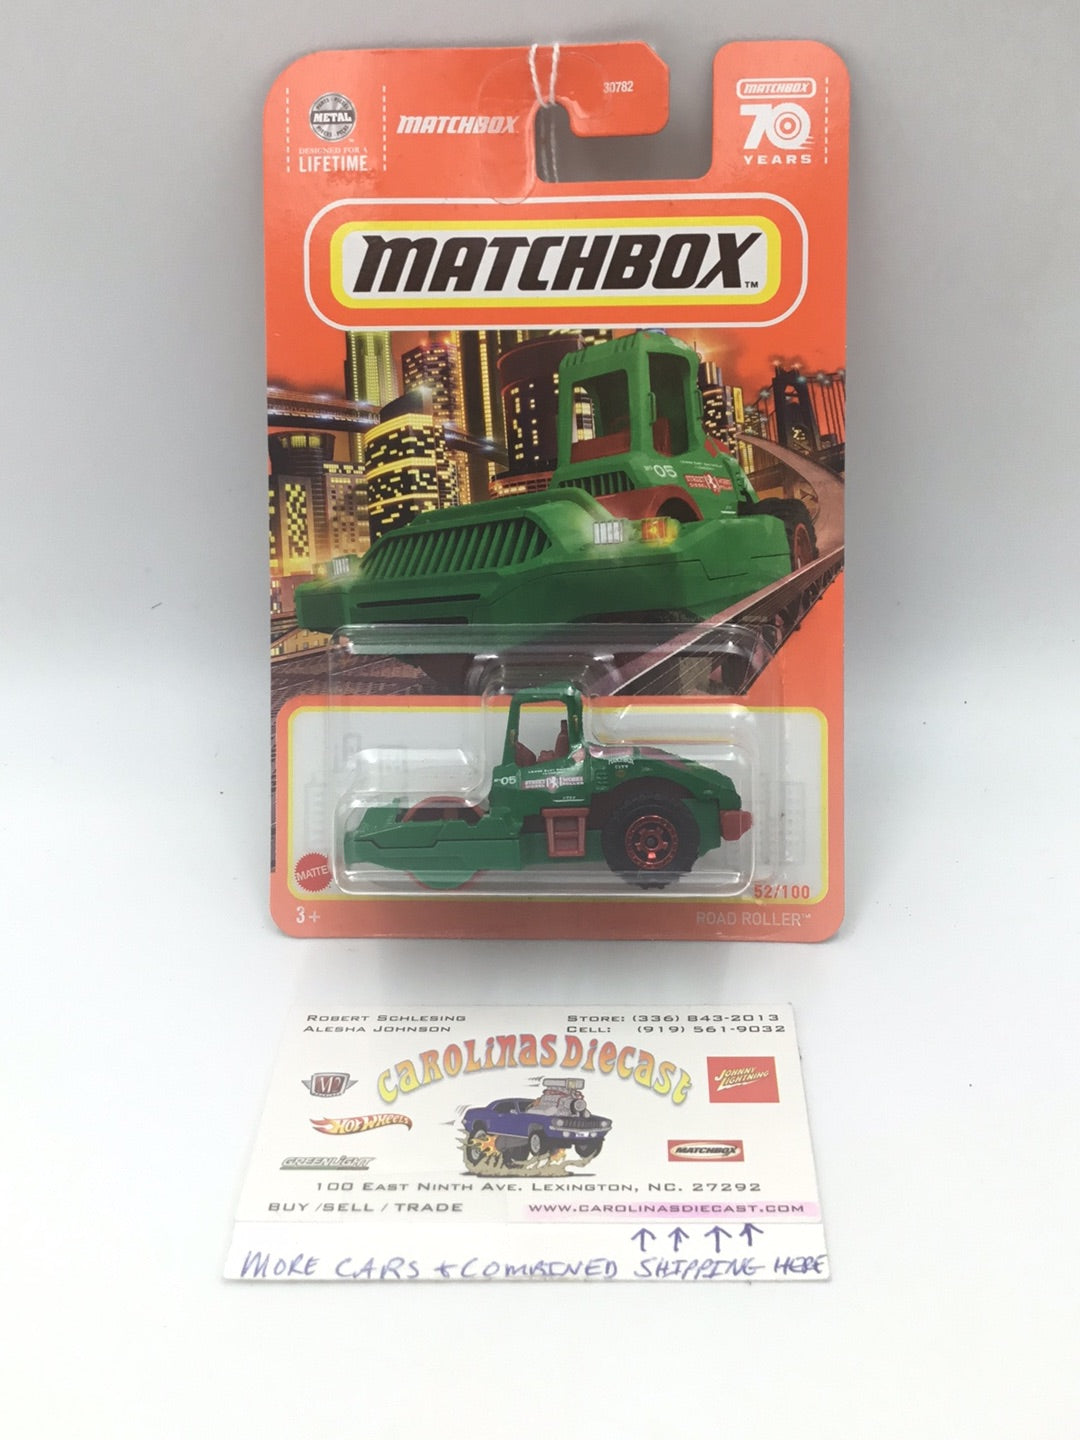 2023 matchbox 70 years #52 Road Roller